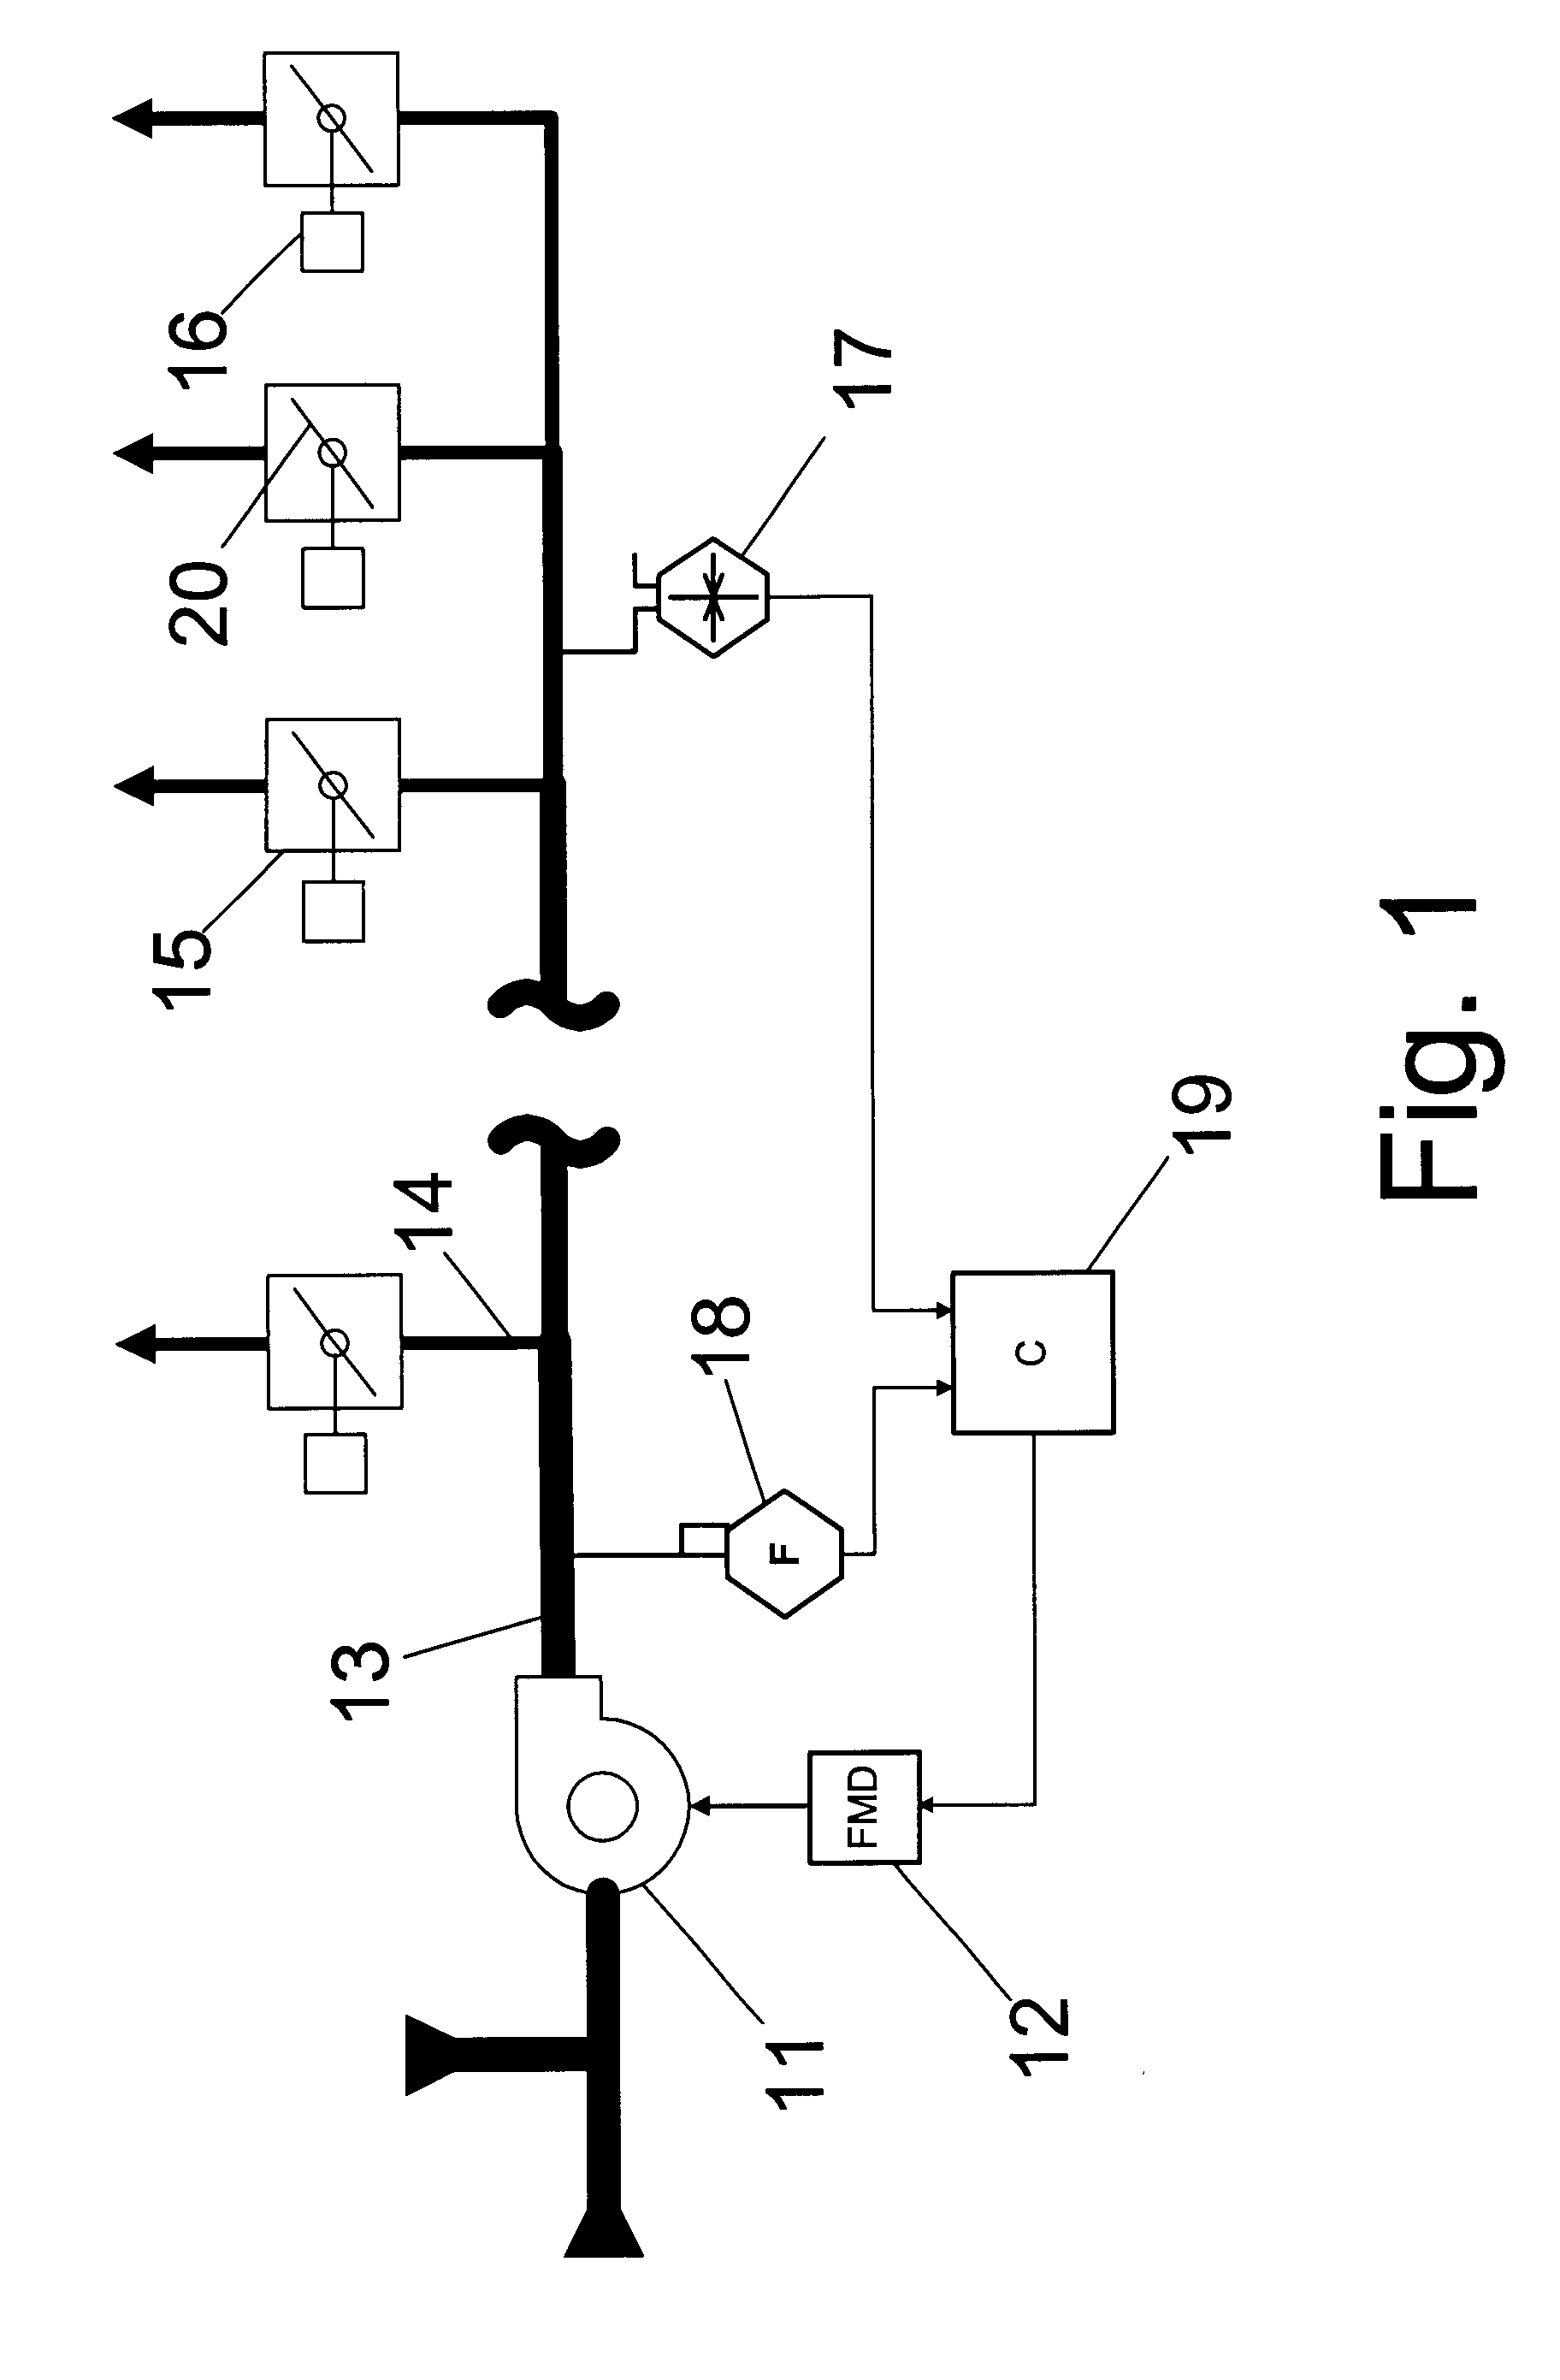 Method and apparatus for controlling variable air volume supply fans in heating, ventilating, and air-conditioning systems